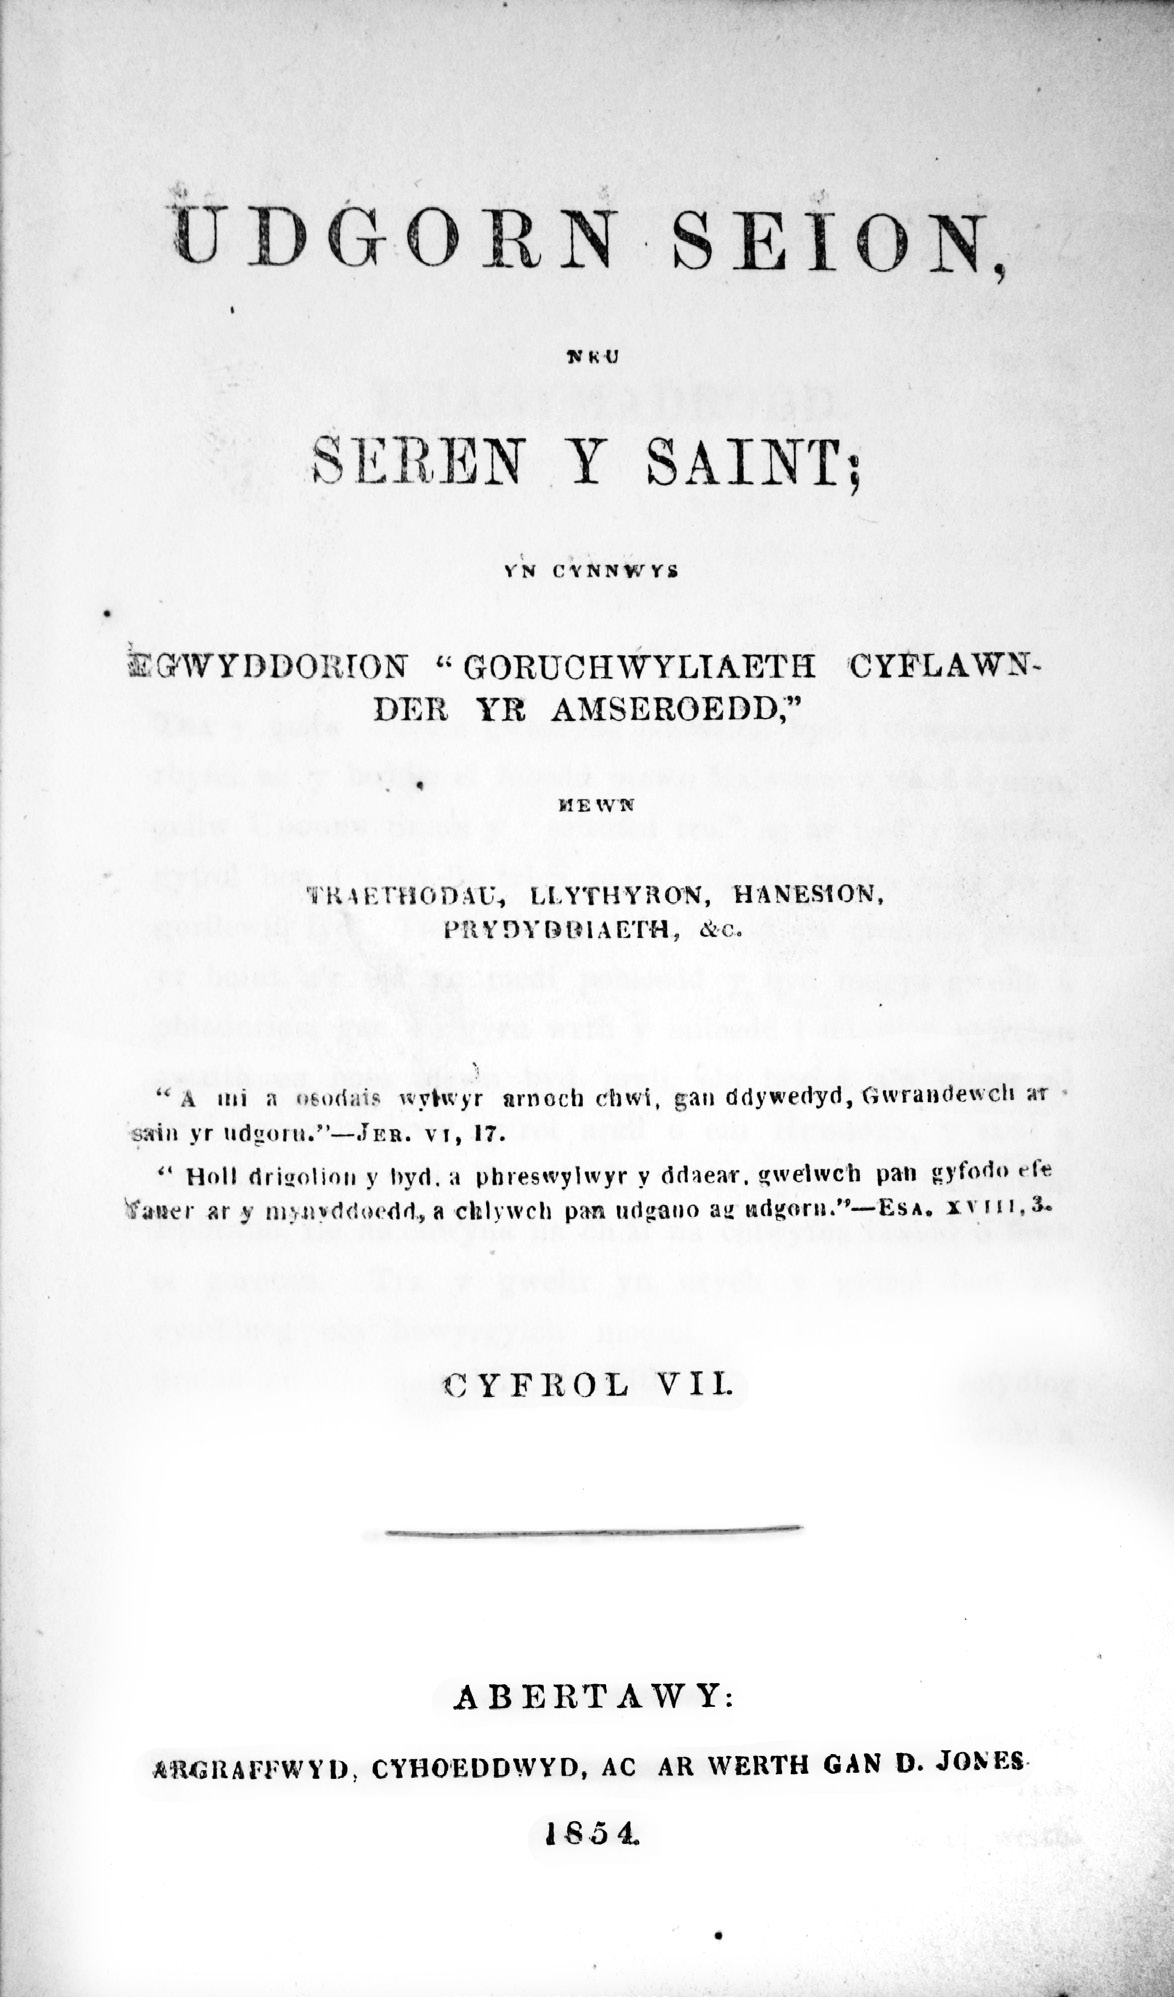 title page of "Udgorn Seion"